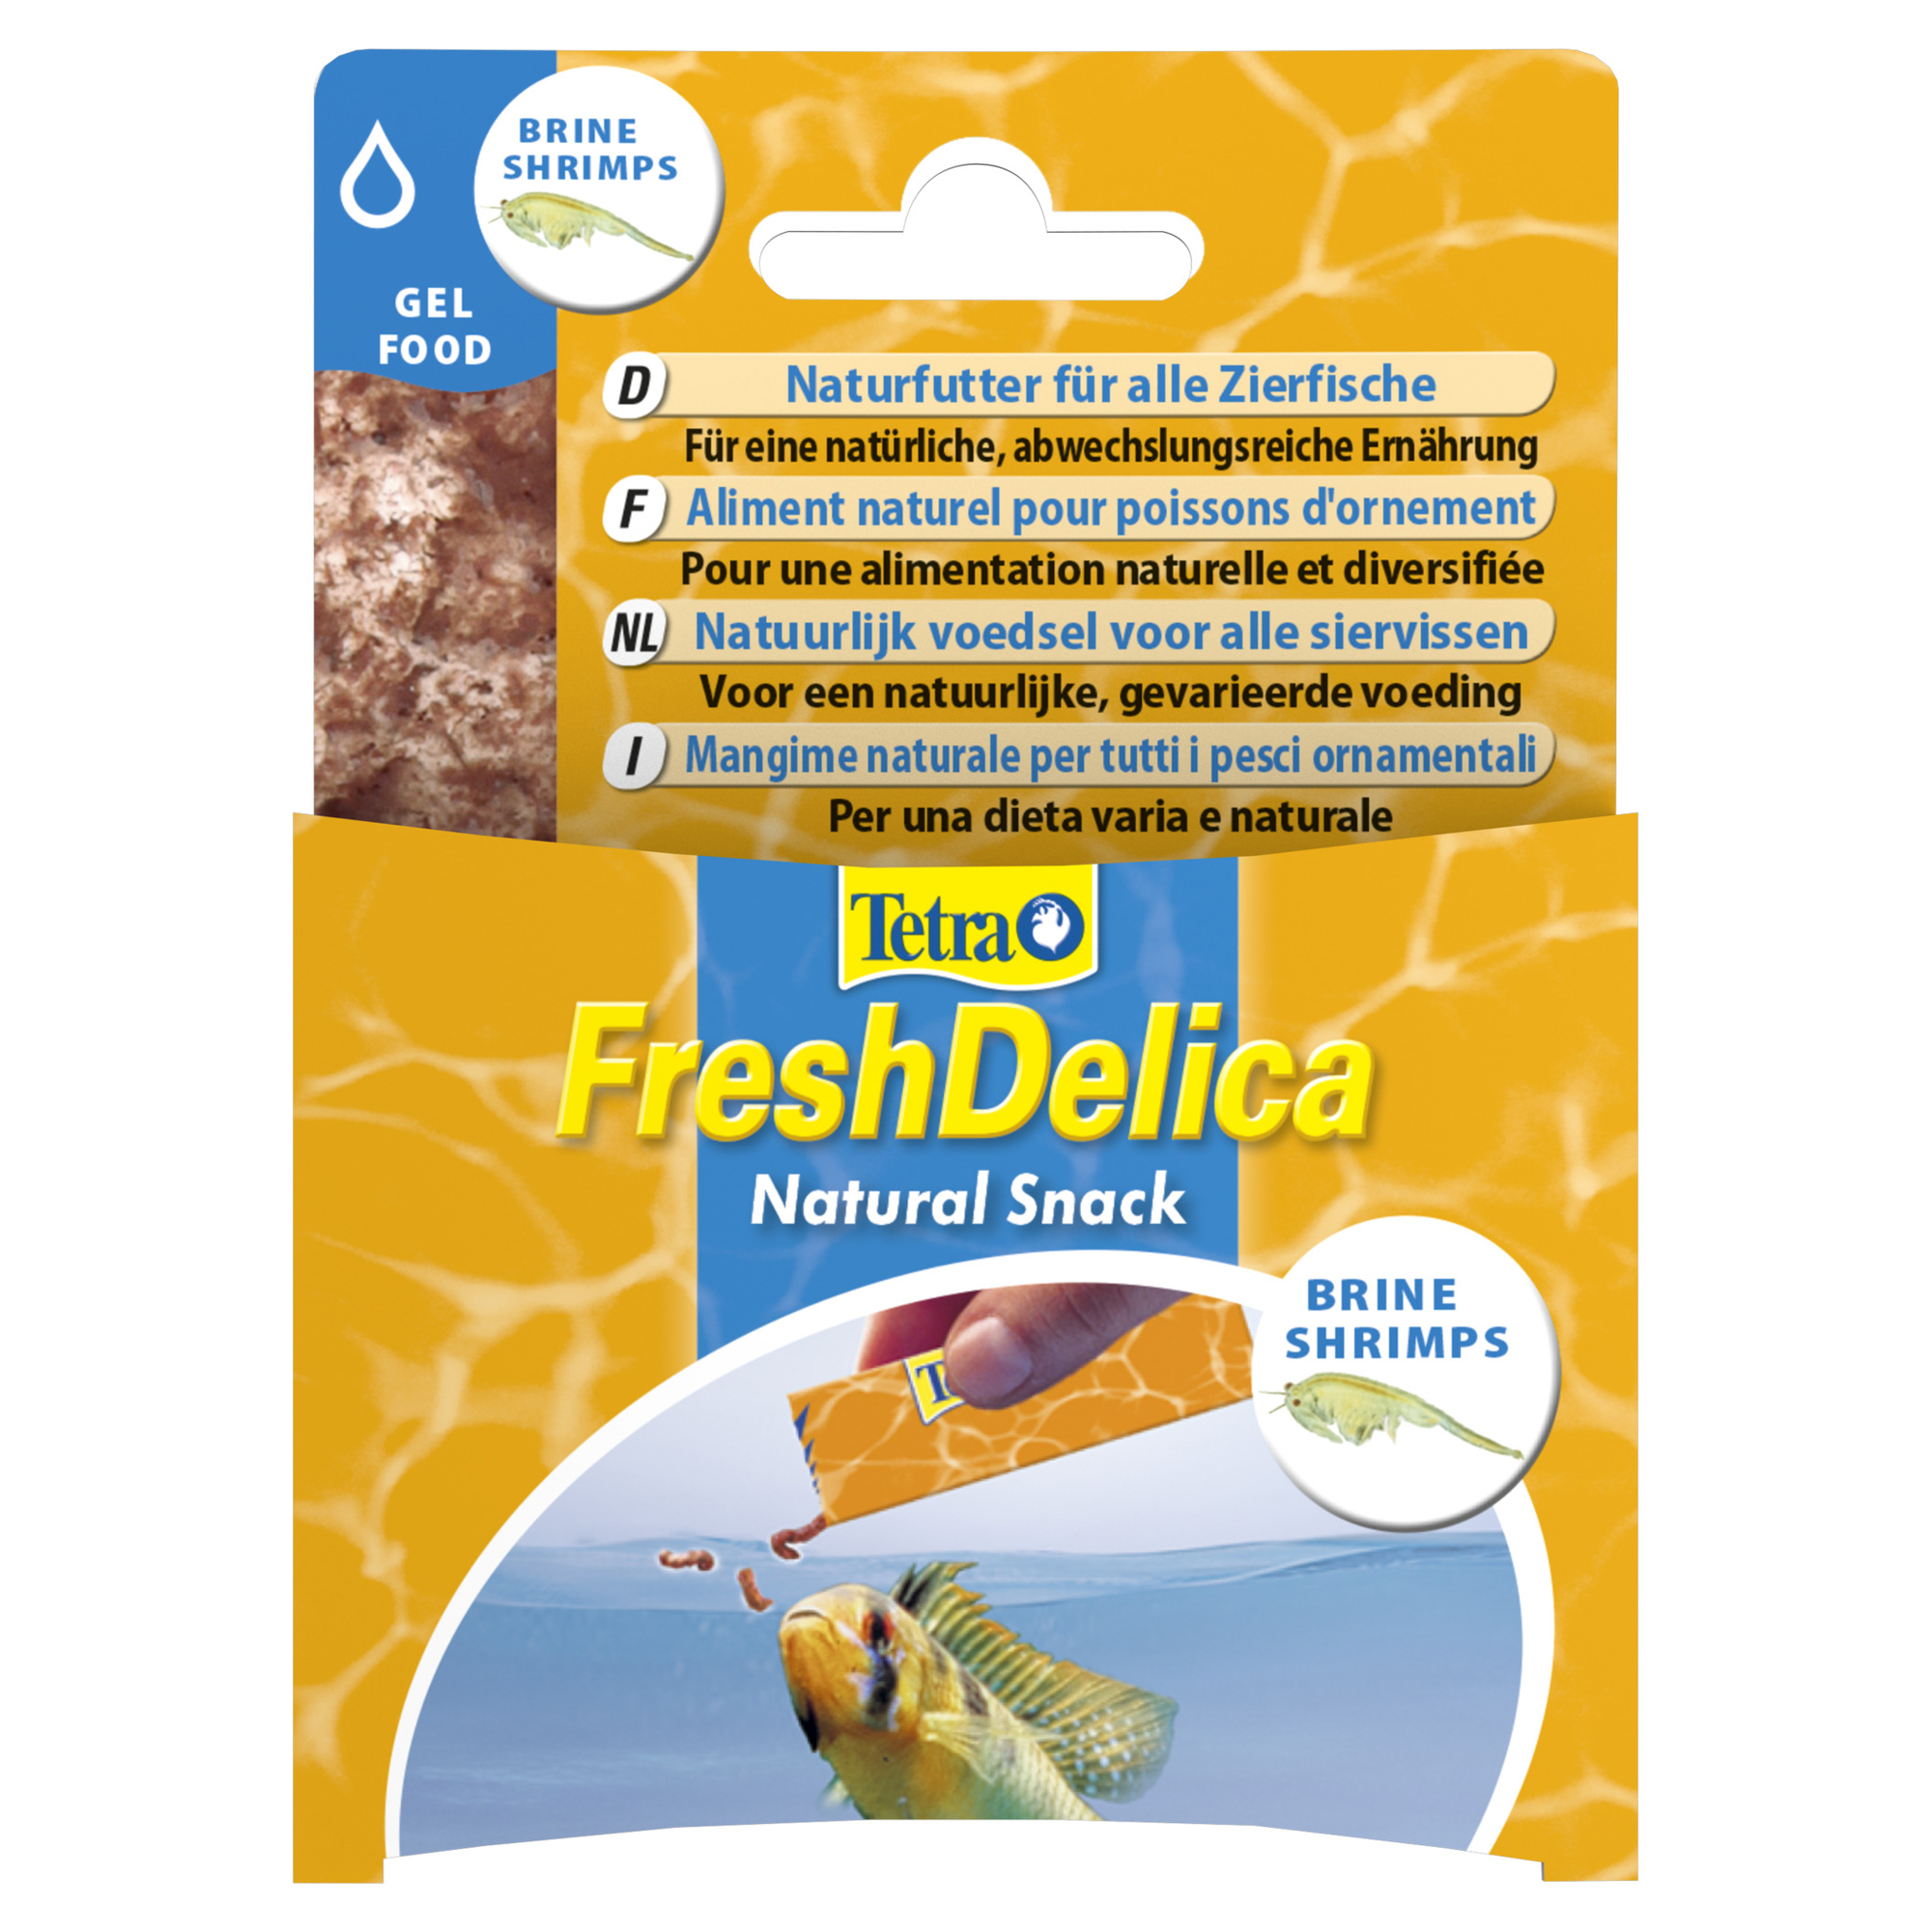 Fischfutter "Fresh Delica" 48 g Natural Snack Brine Shrimps + product picture